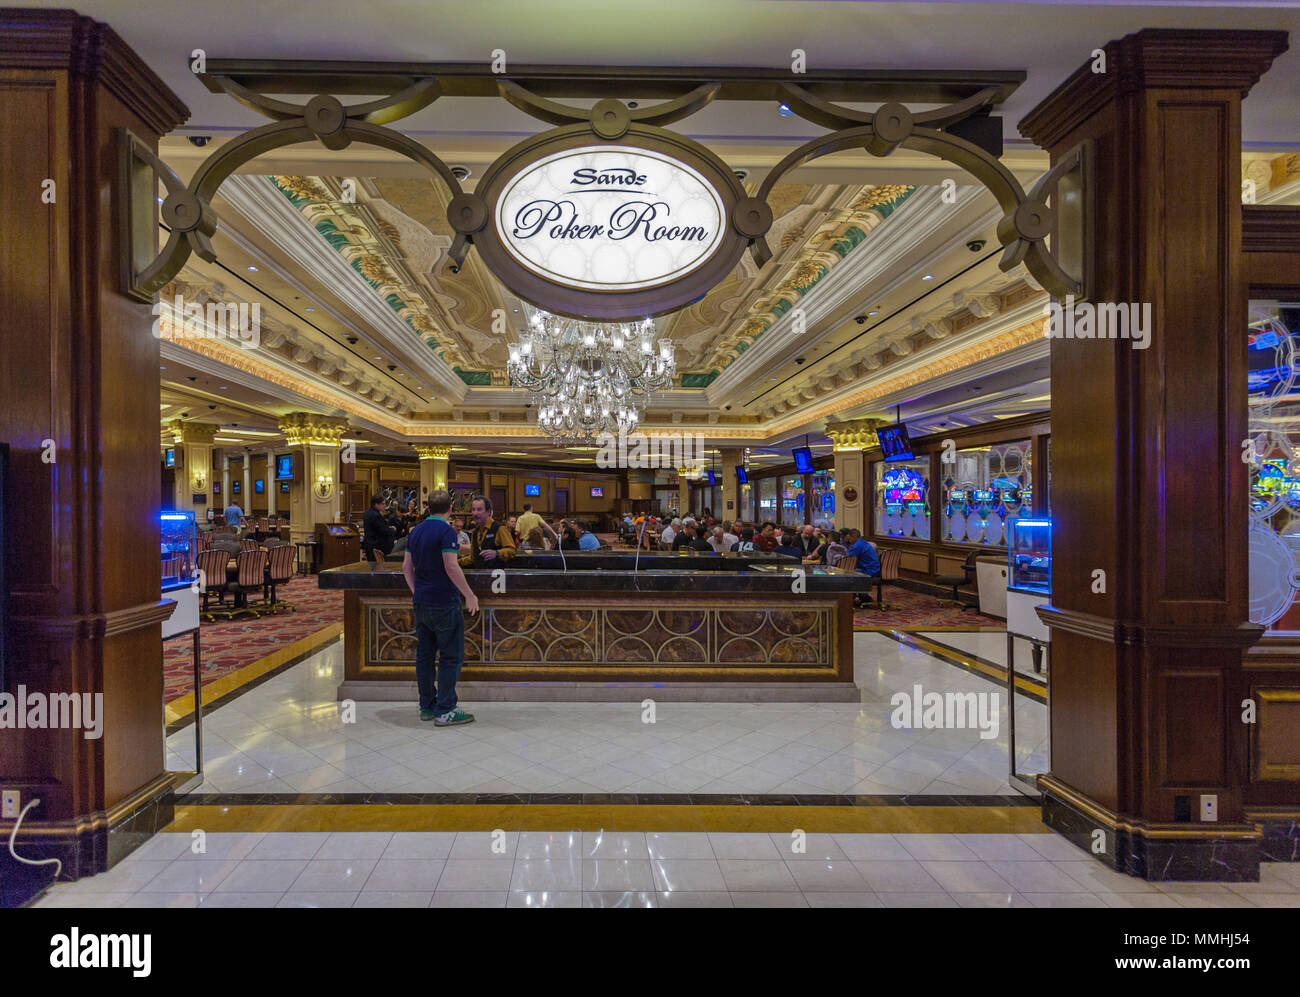 Entrance to the Sands Poker Room at the Venetian Resort Hotel Casino on the Las Vegas Strip in Paradise, Nevada Stock Photo